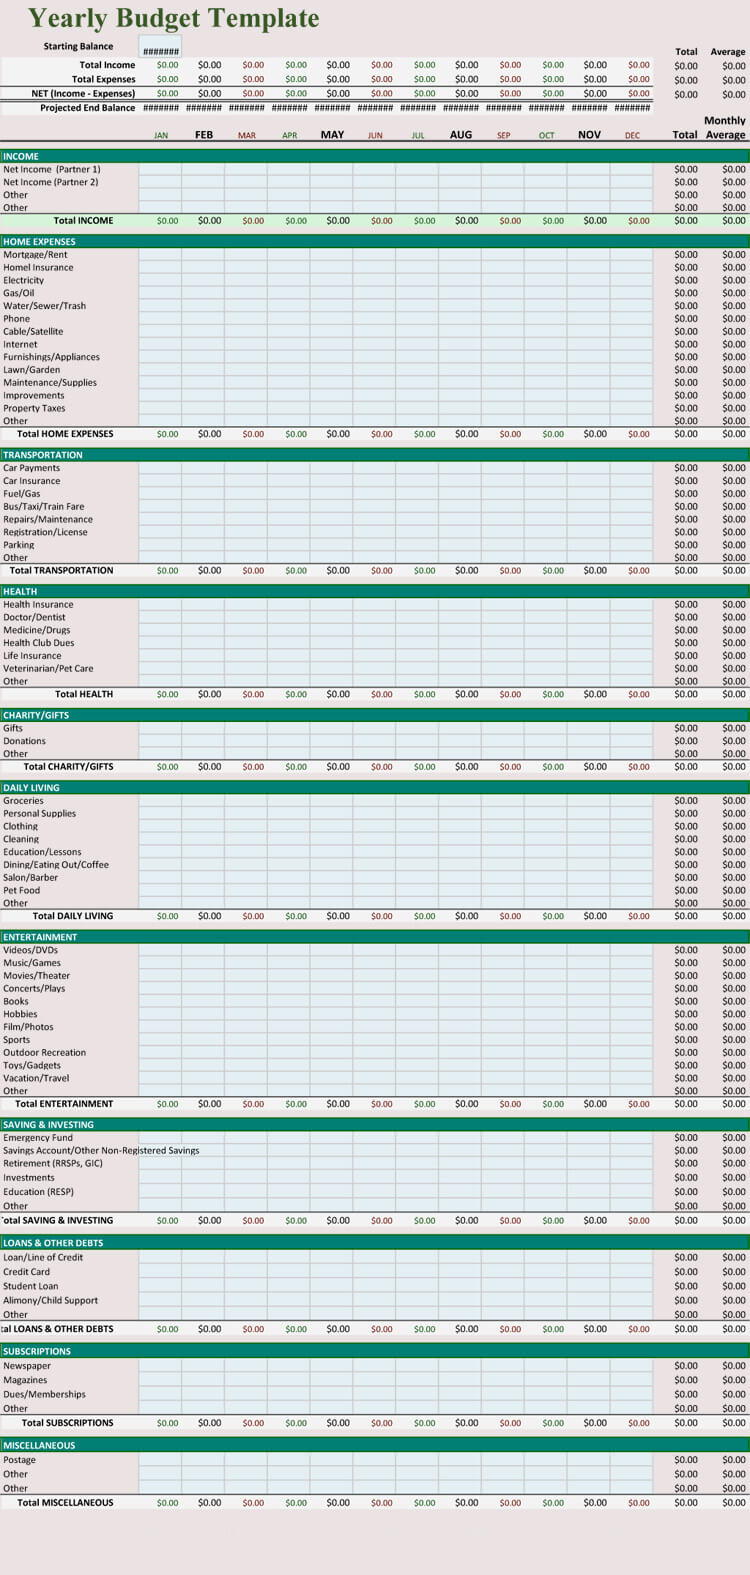 Free Yearly Budget Templates for Excel (How to Plan) For Annual Budget Report Template